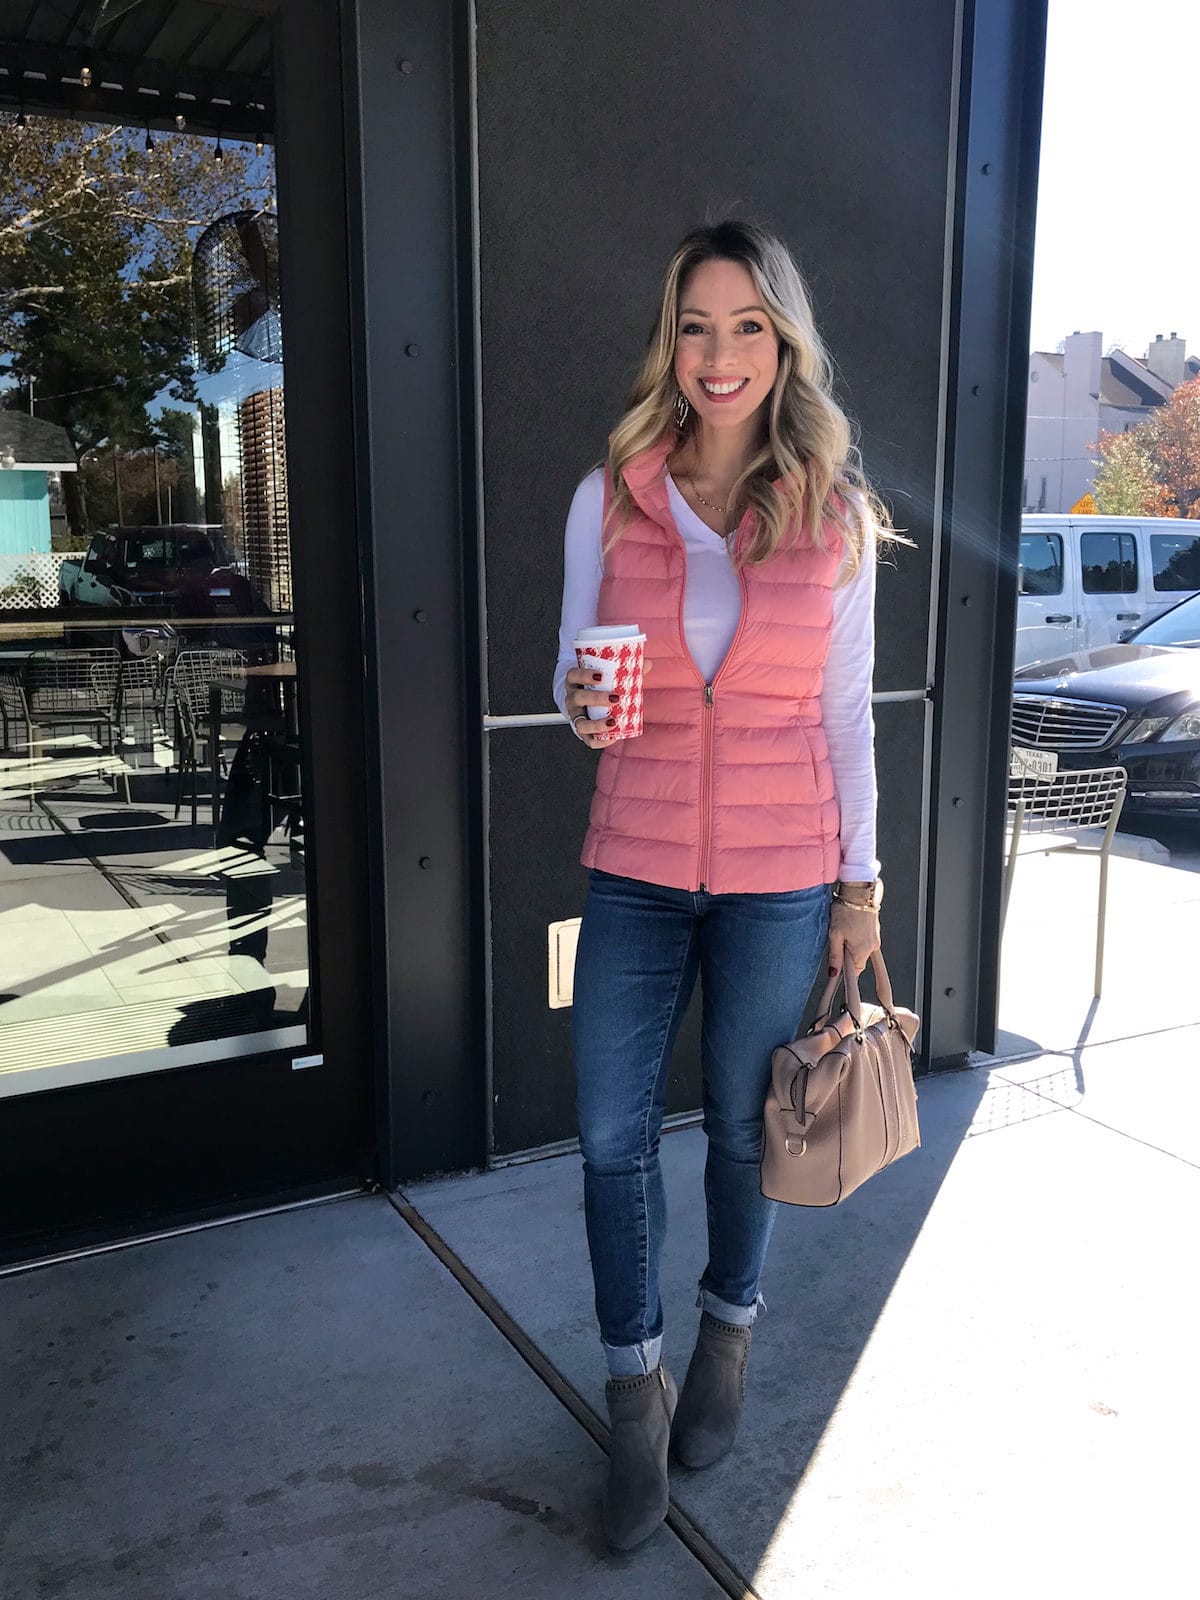 Amazon Fashion Prime Day Haul - Cute winter outfit with puffer vest